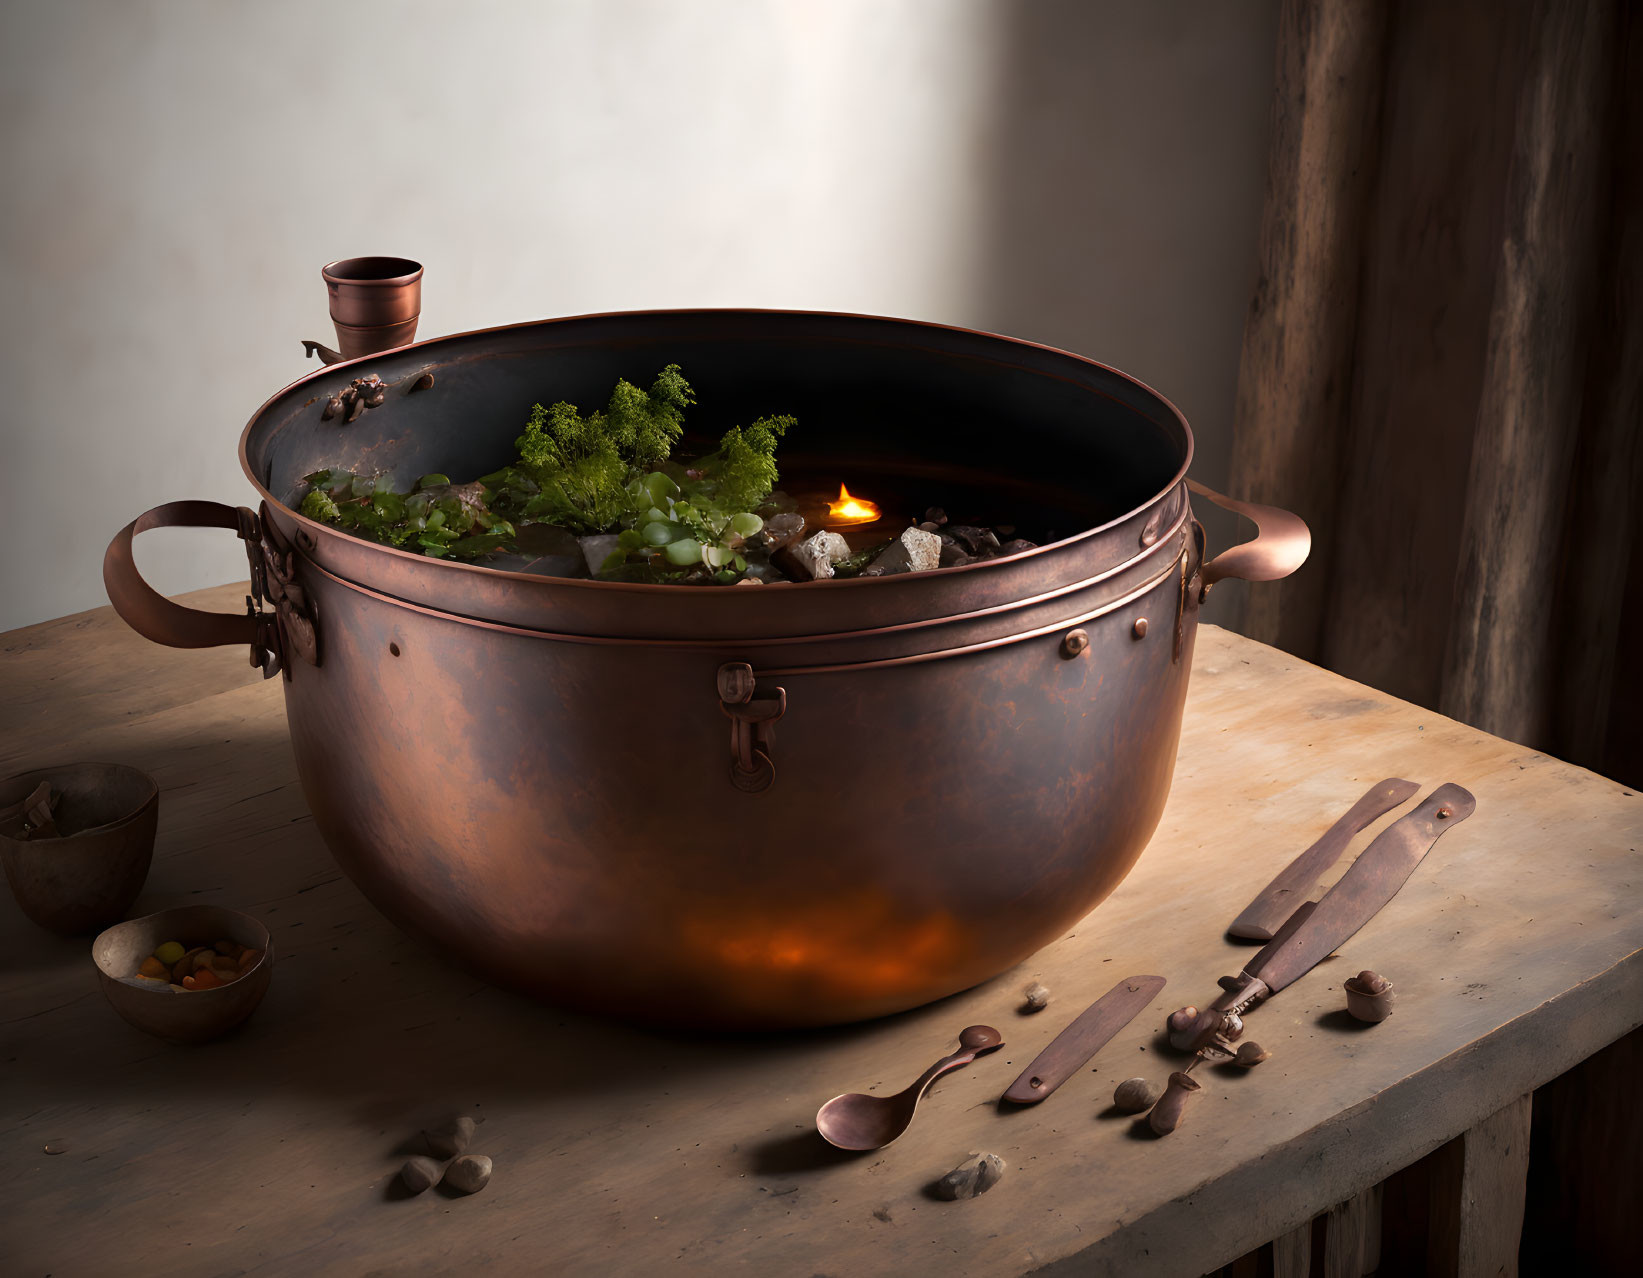 Landscape in an old cooking pot